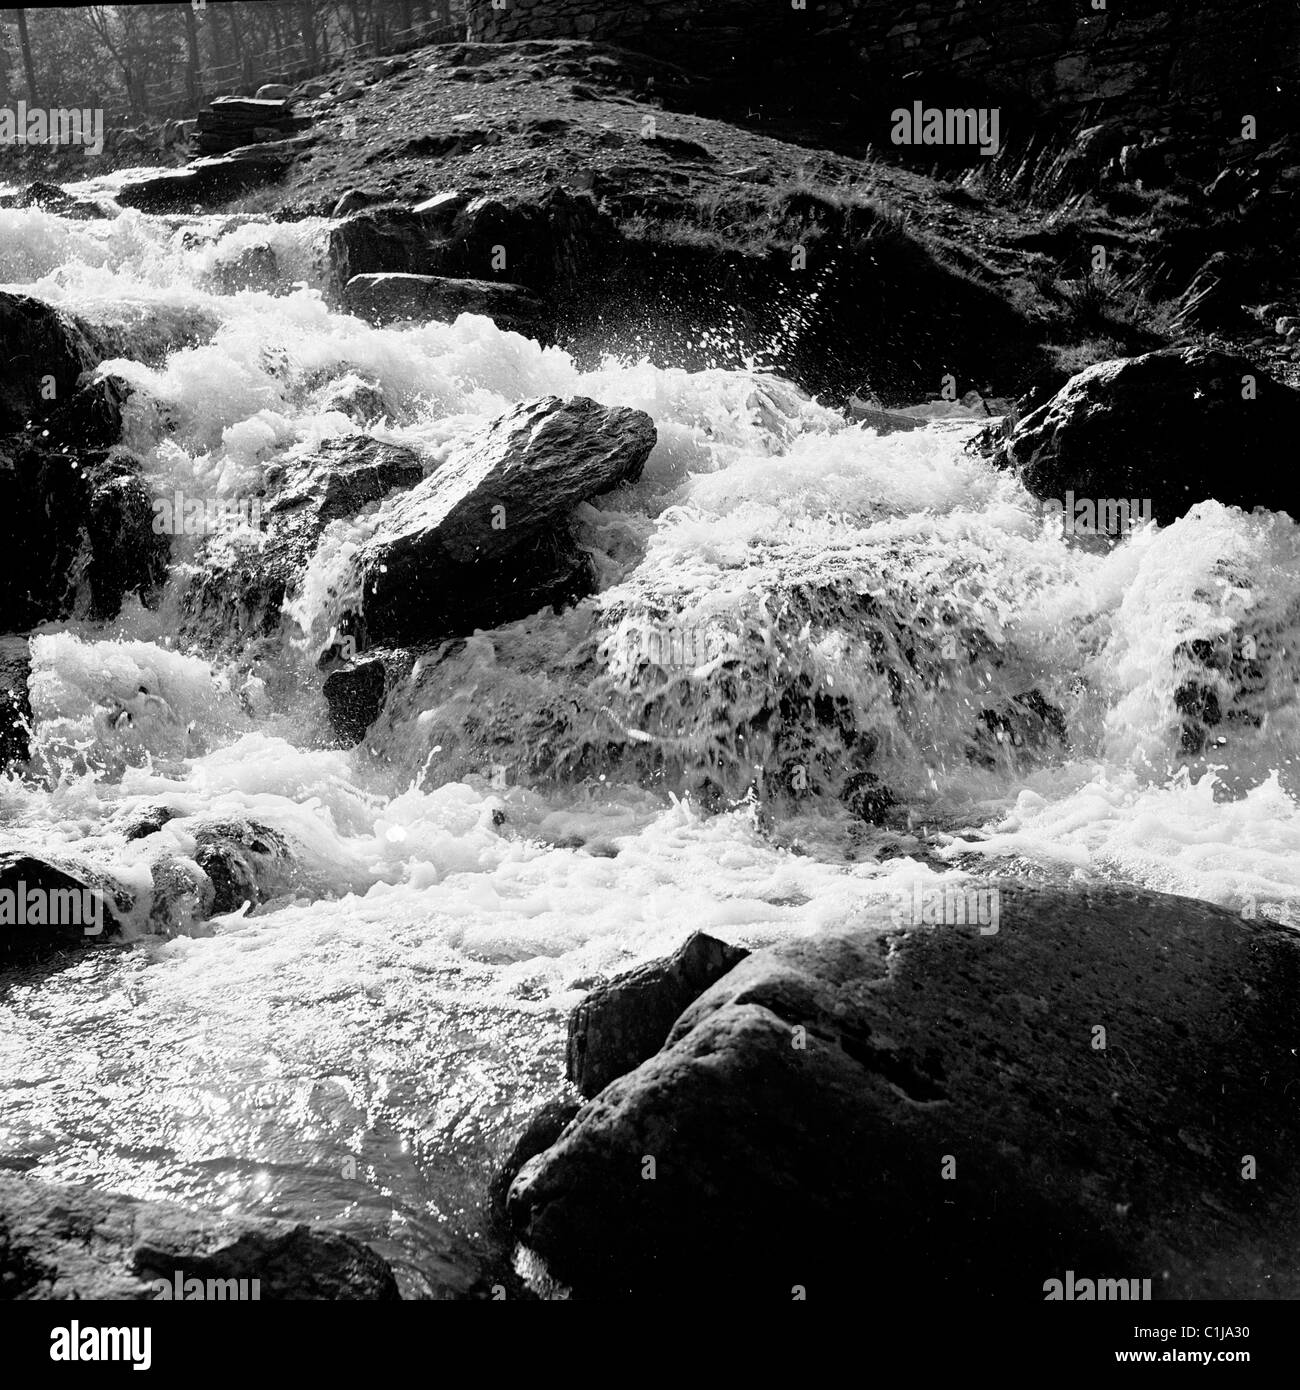 1950s, historical, fast flowing river, water going over rocks, Wales, UK. Stock Photo